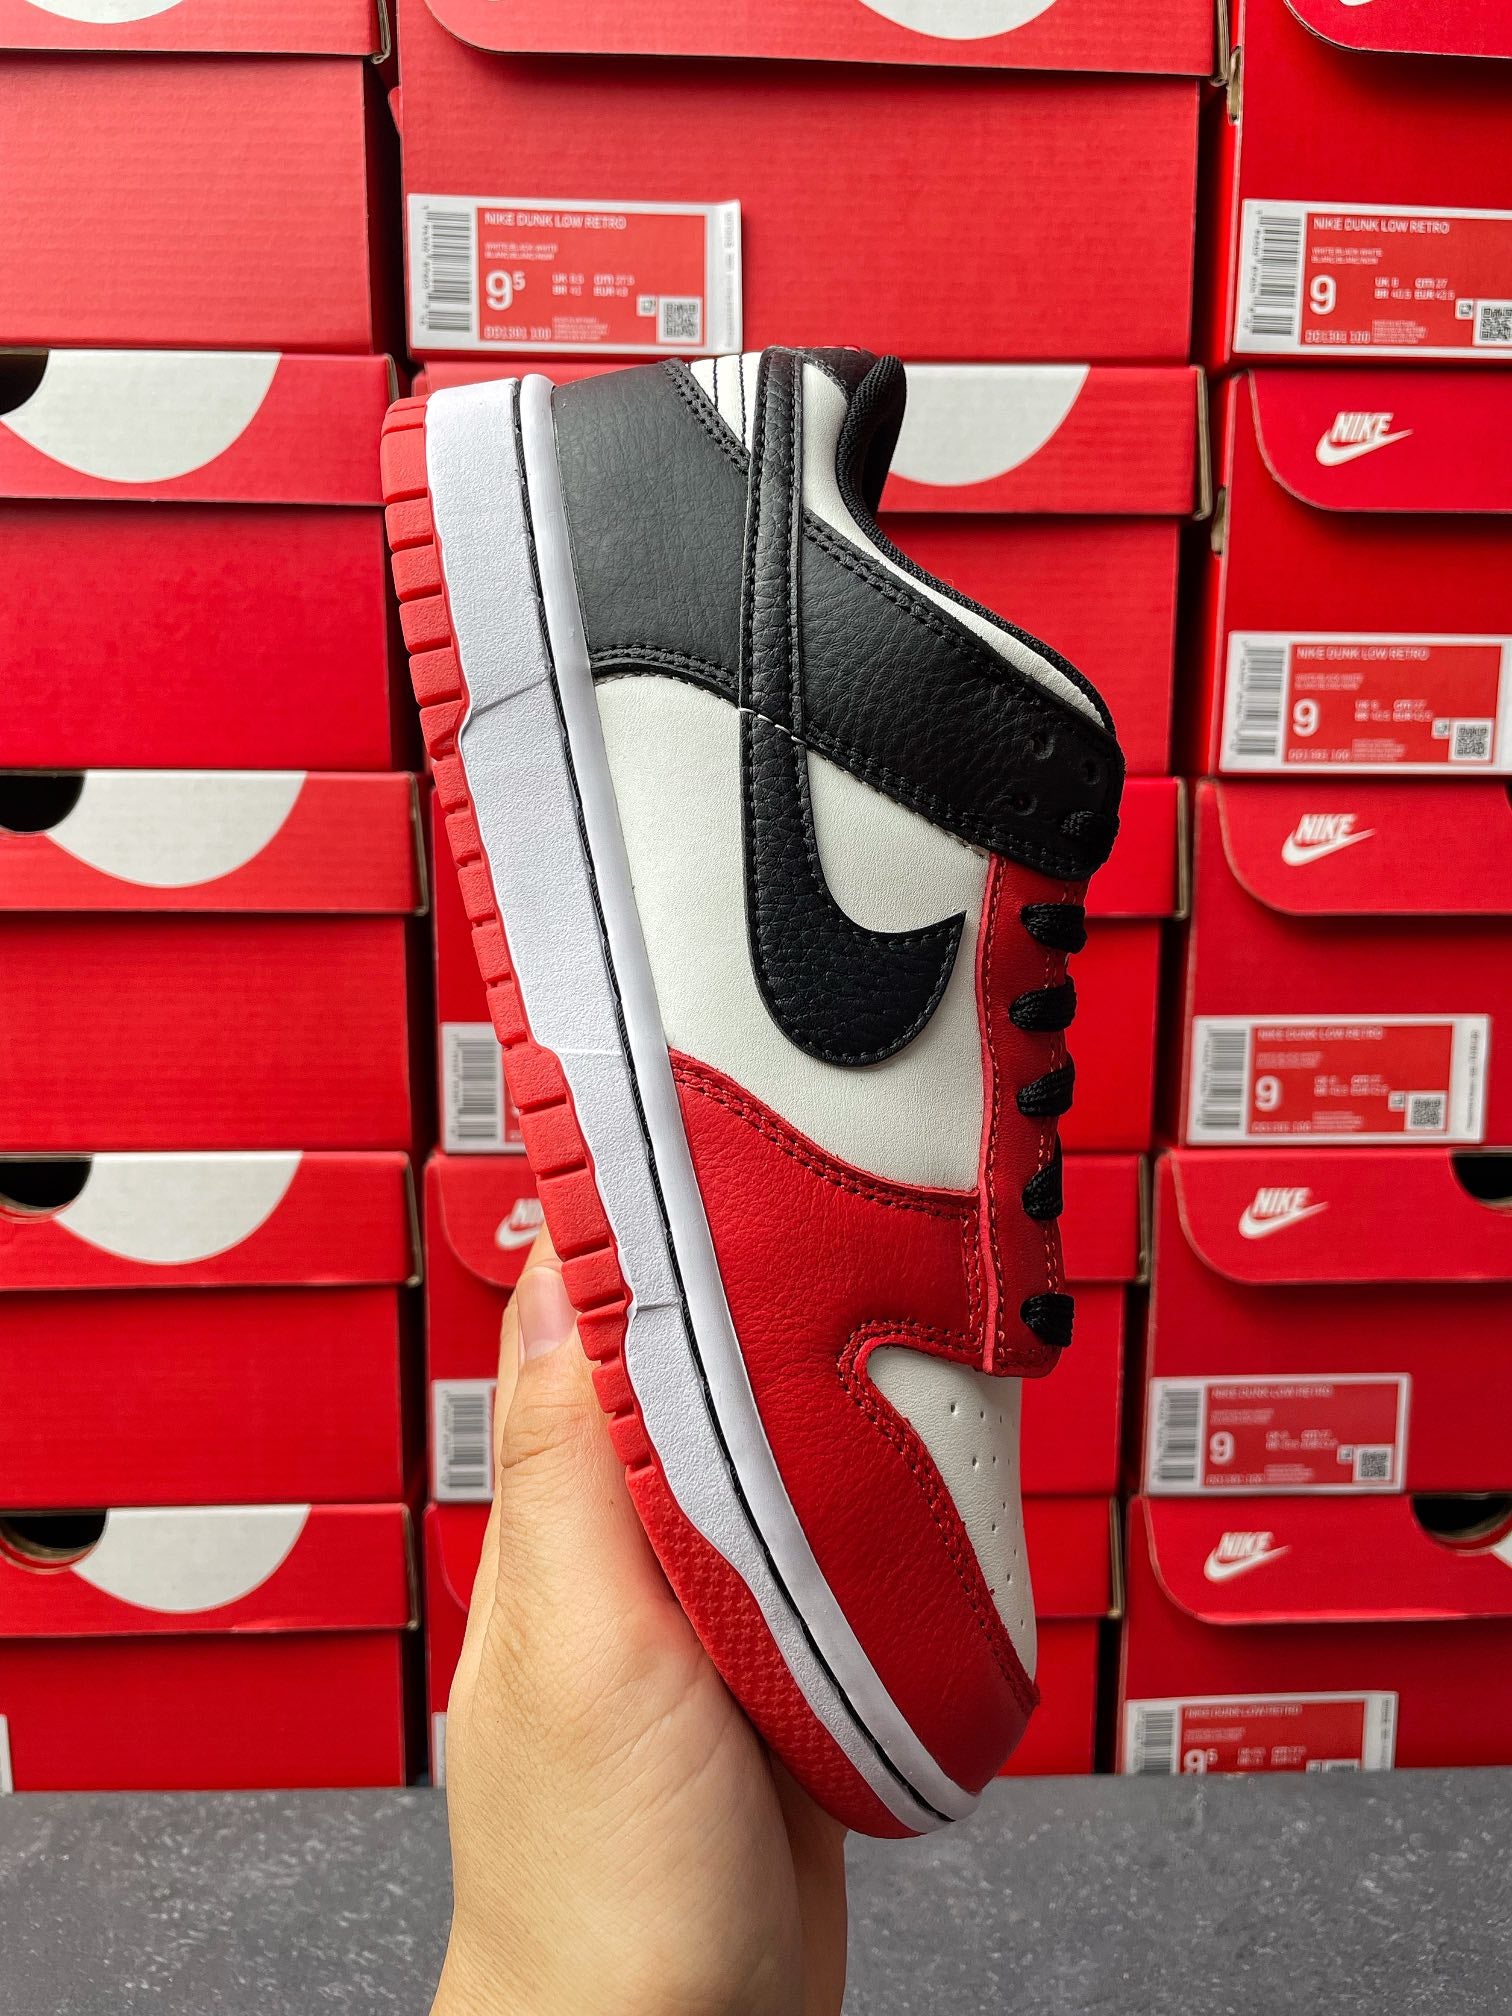 G Batch-Nike Dunk Low “Chicago”